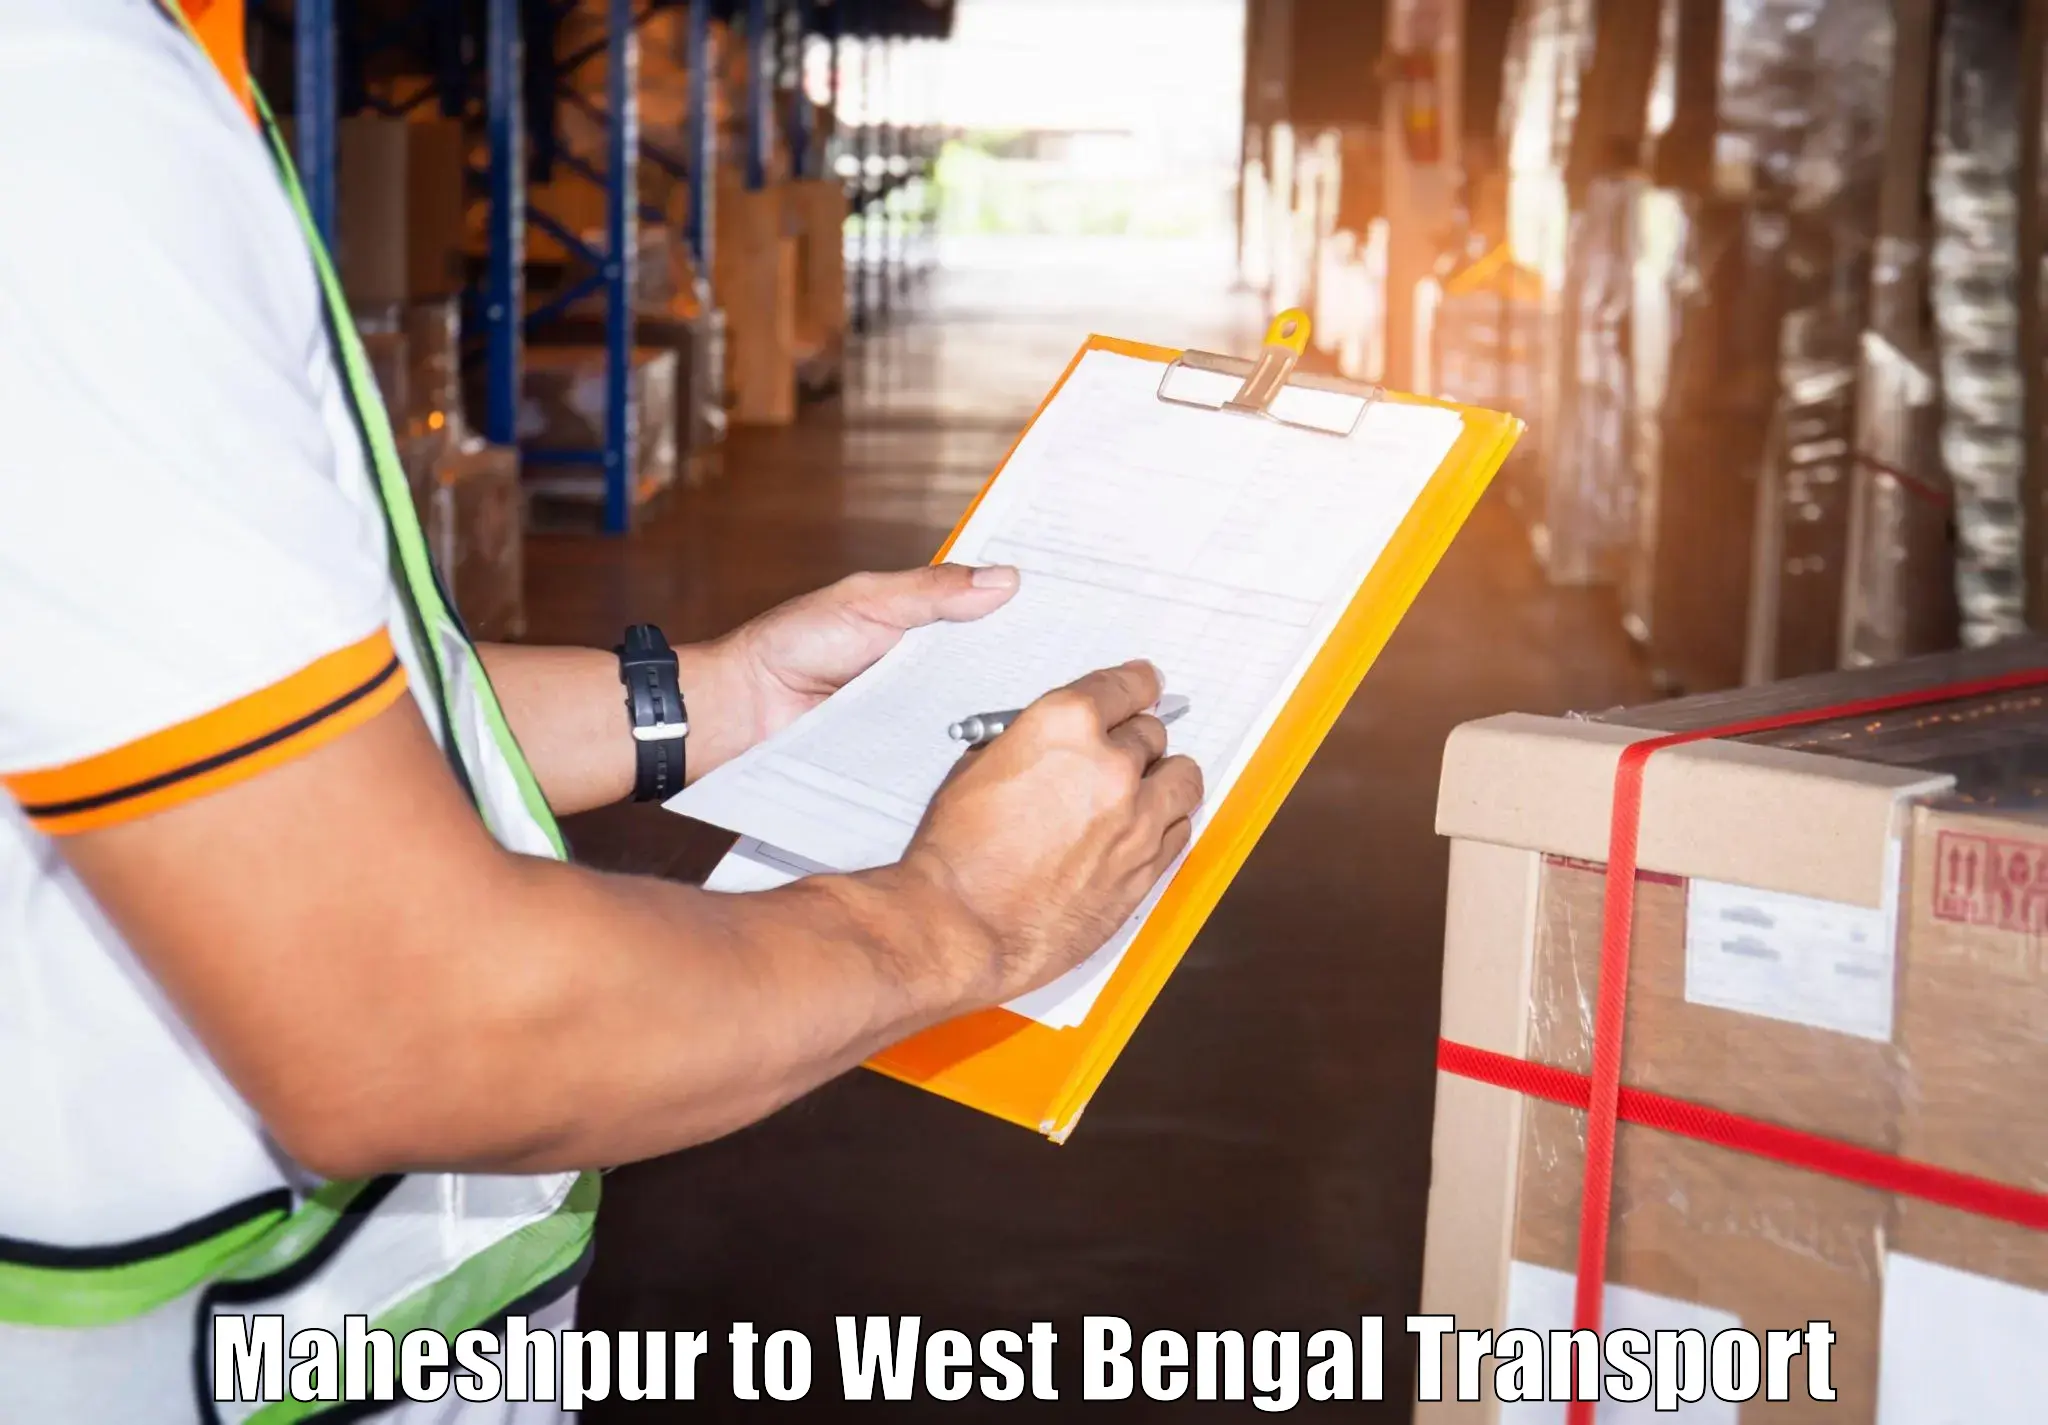 Truck transport companies in India Maheshpur to West Bengal